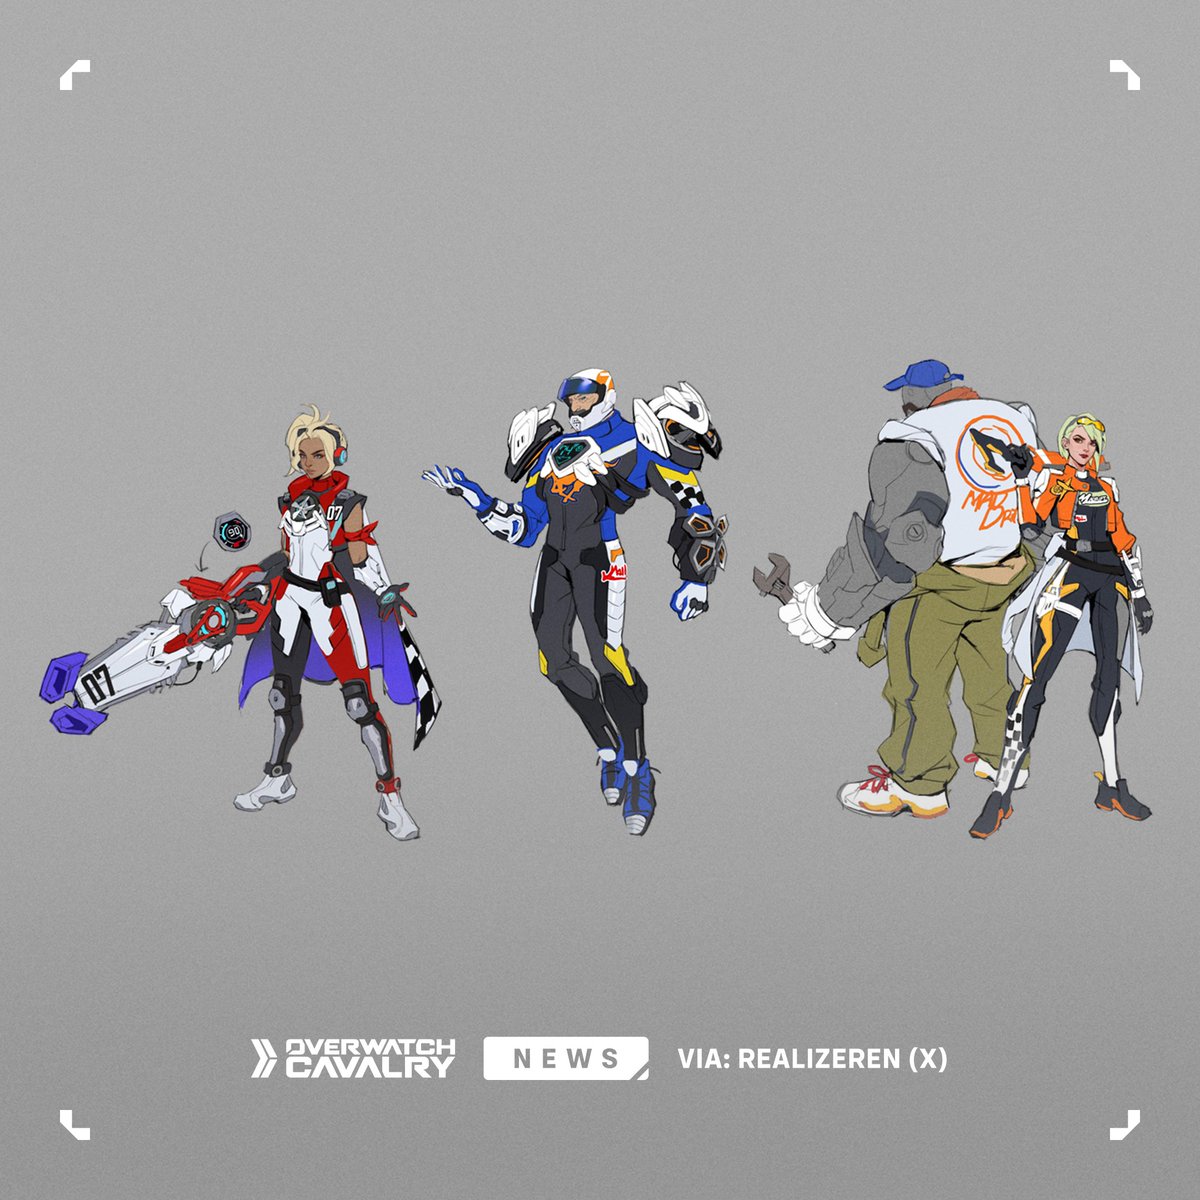 New racing skin concepts from the #Overwatch2 survey 🏁 📸 Image Credit: @realizeren